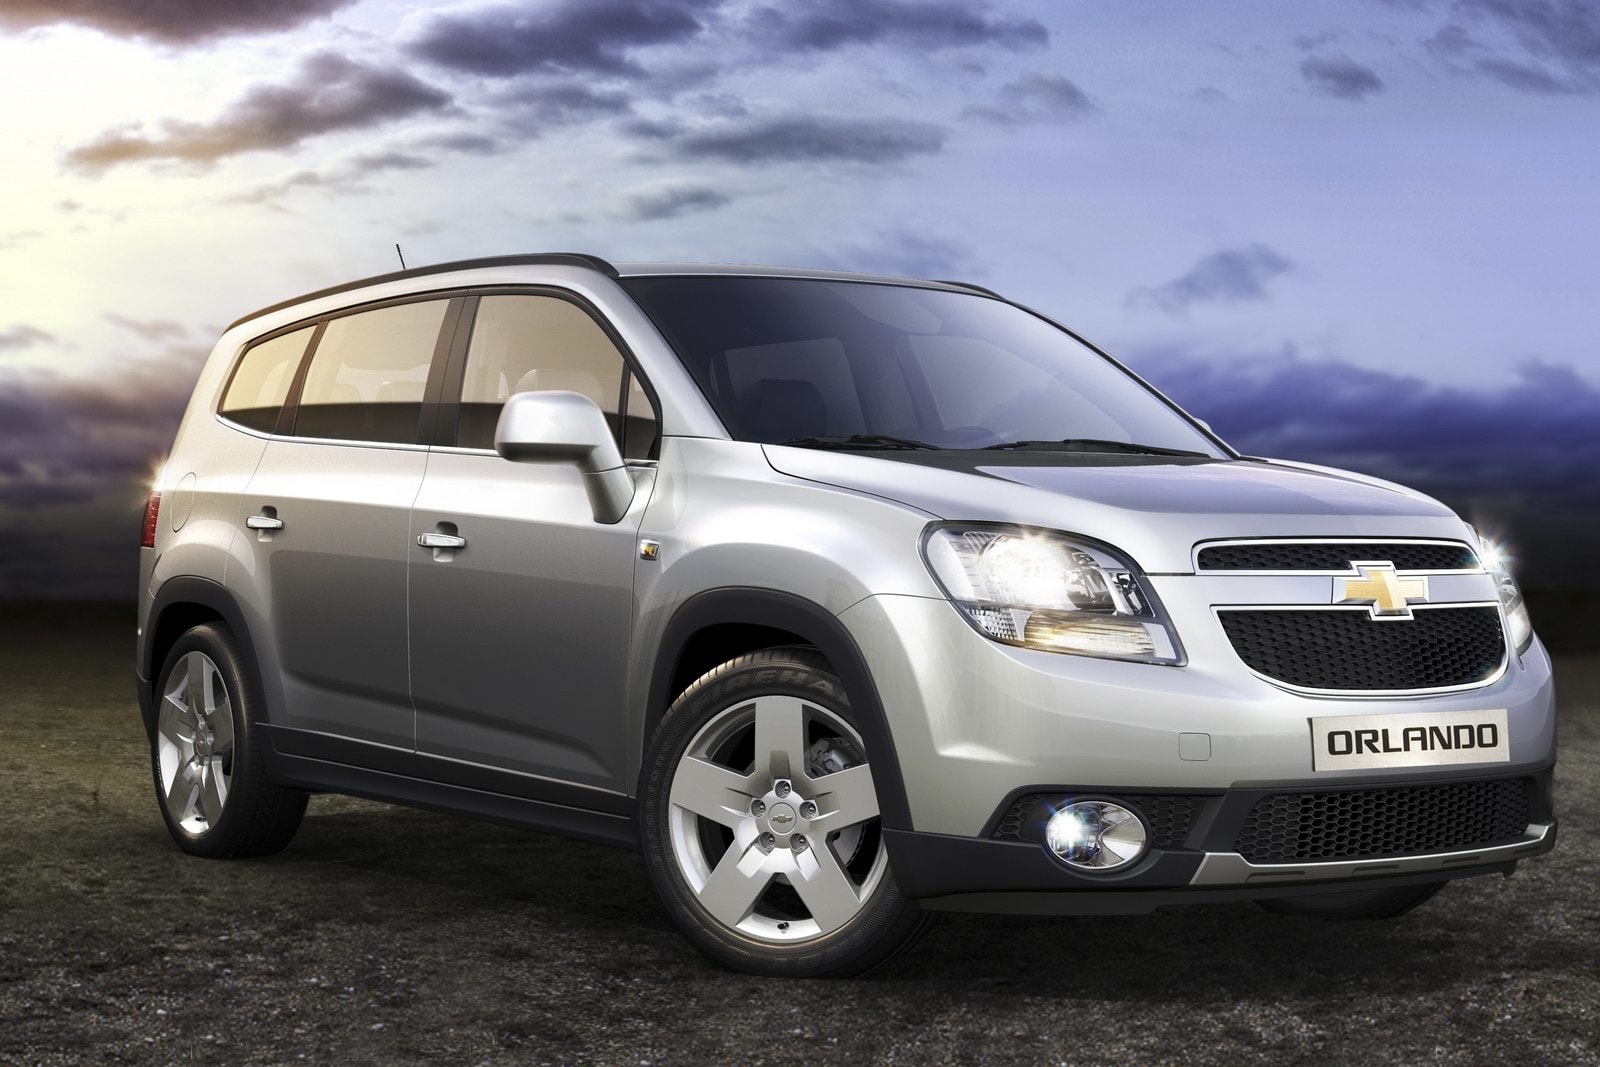 2012 Chevrolet Orlando Arrives in Canada This October for CAD19,995 ...